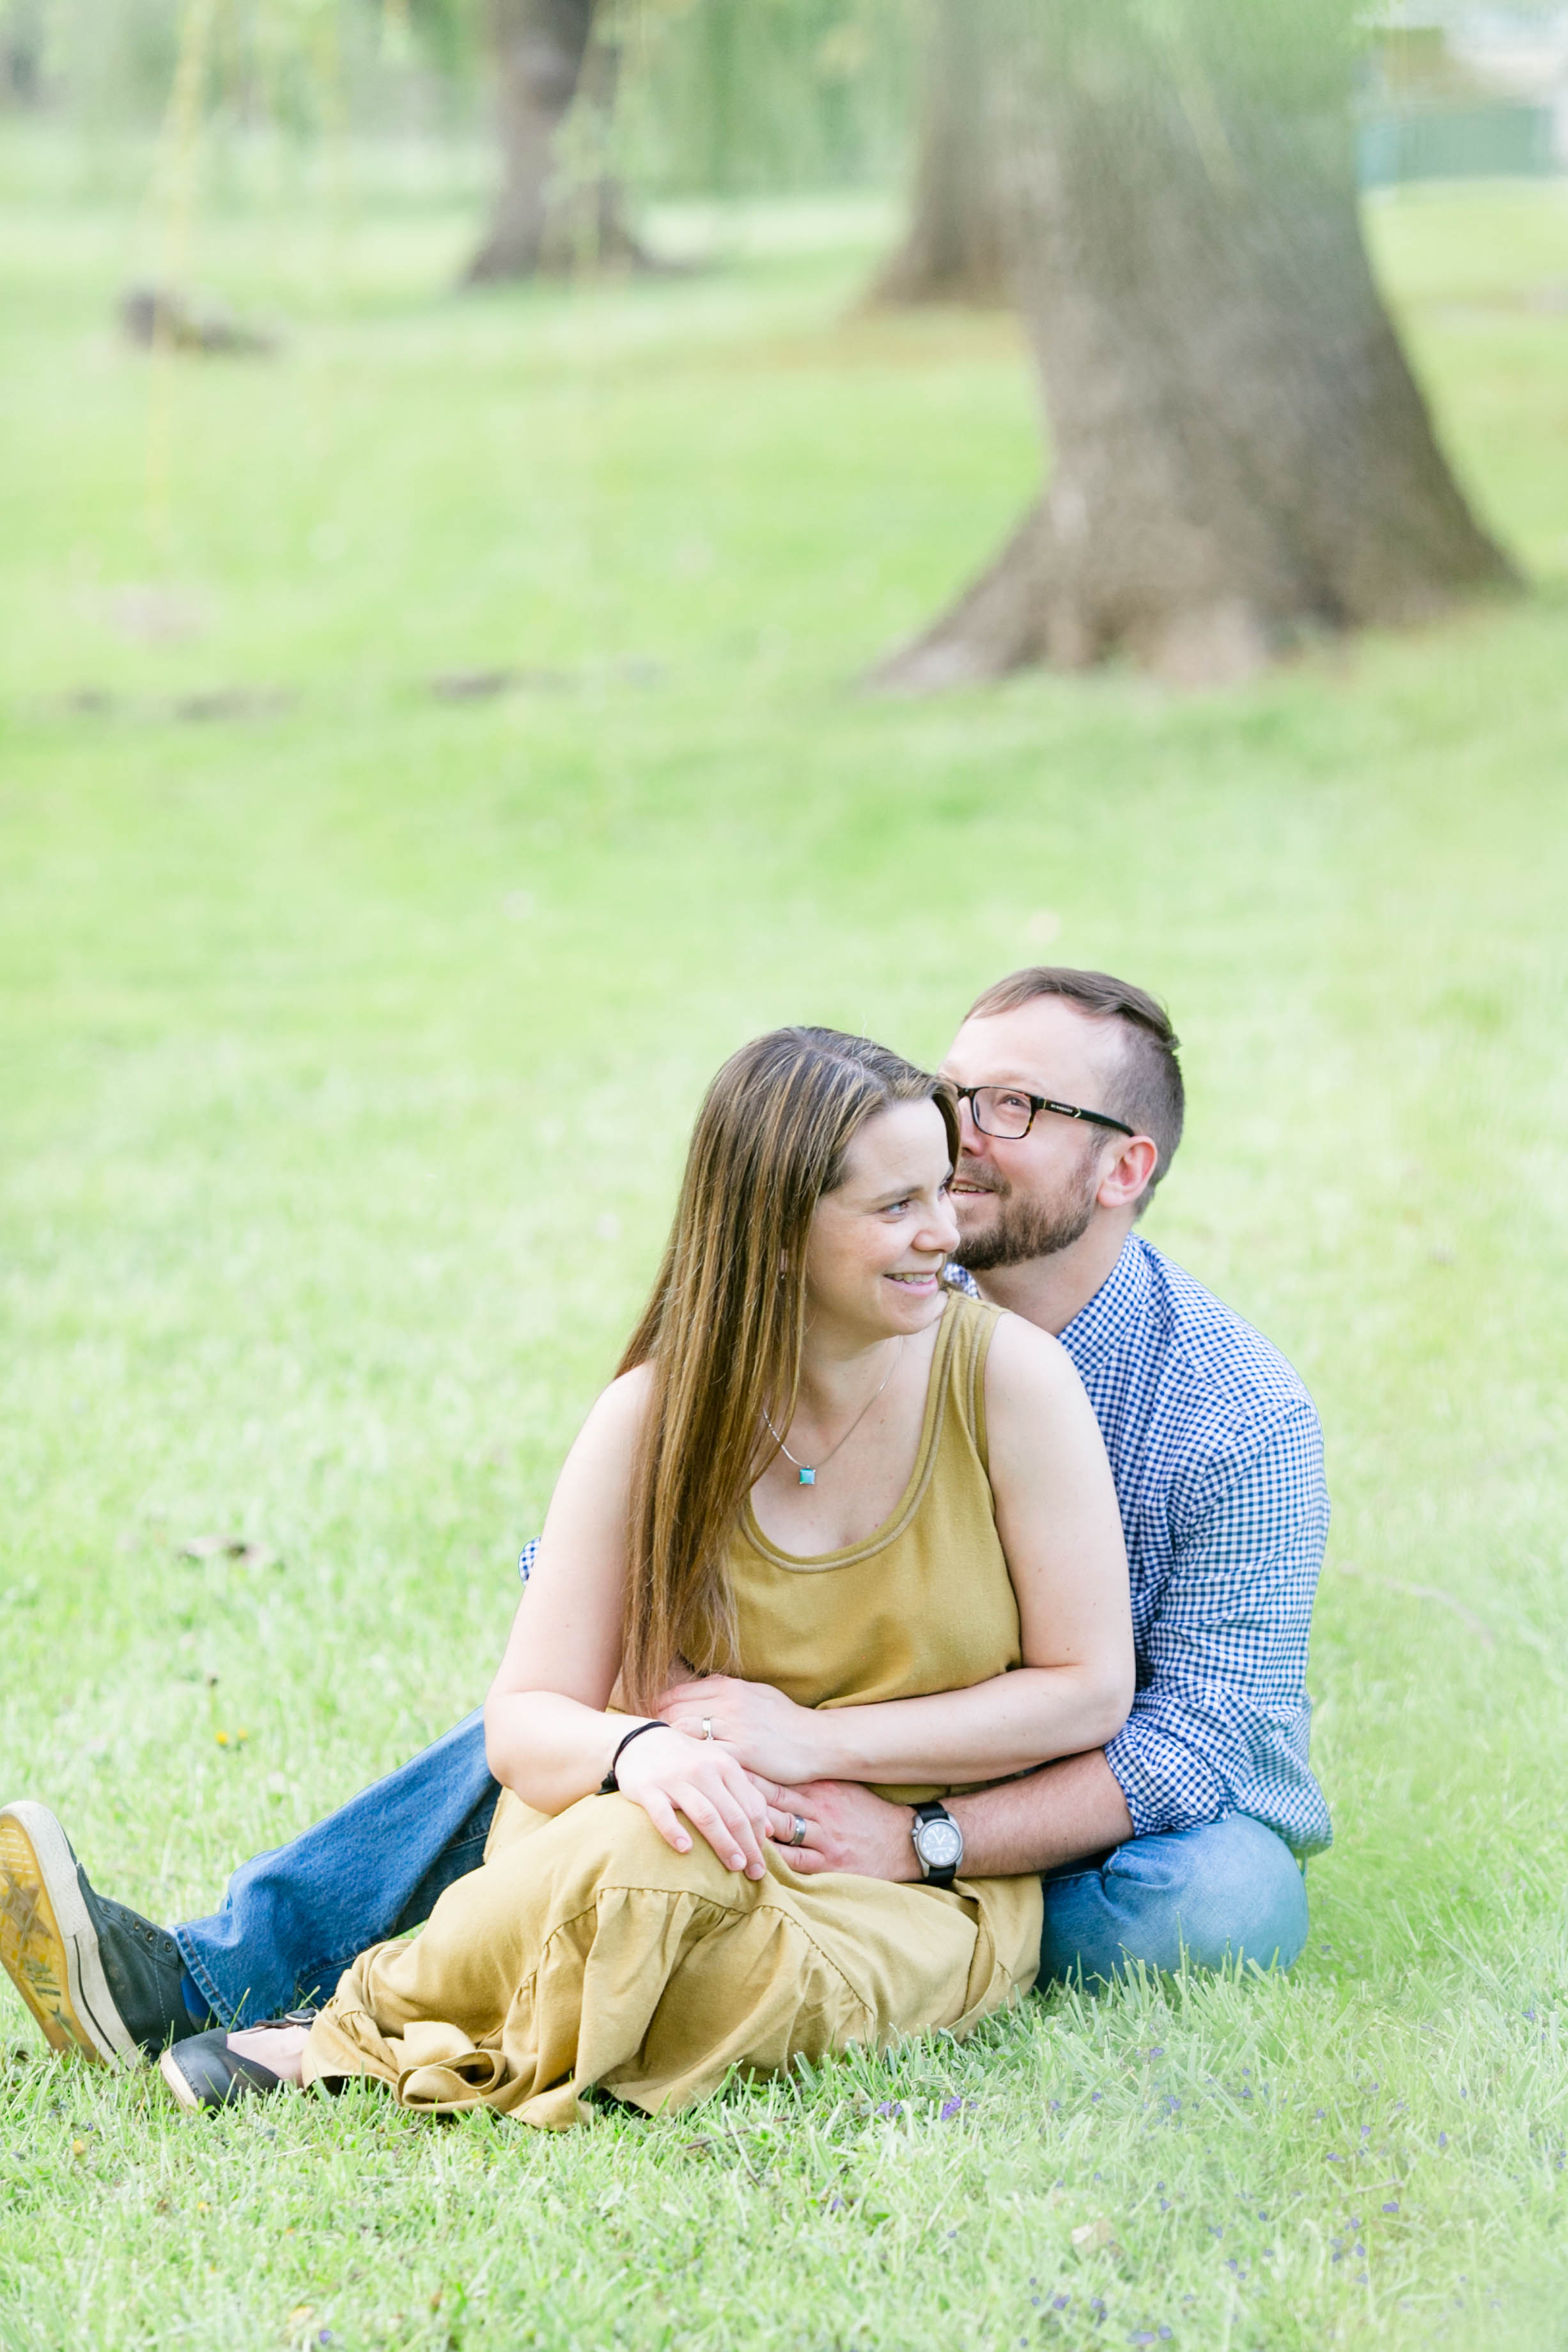 East Tennessee photography, Johnson City, Tri Cities, Jonesborough, family session, spring, engagement, wedding photographer, anniversary photos, portraits, bright and airy photography